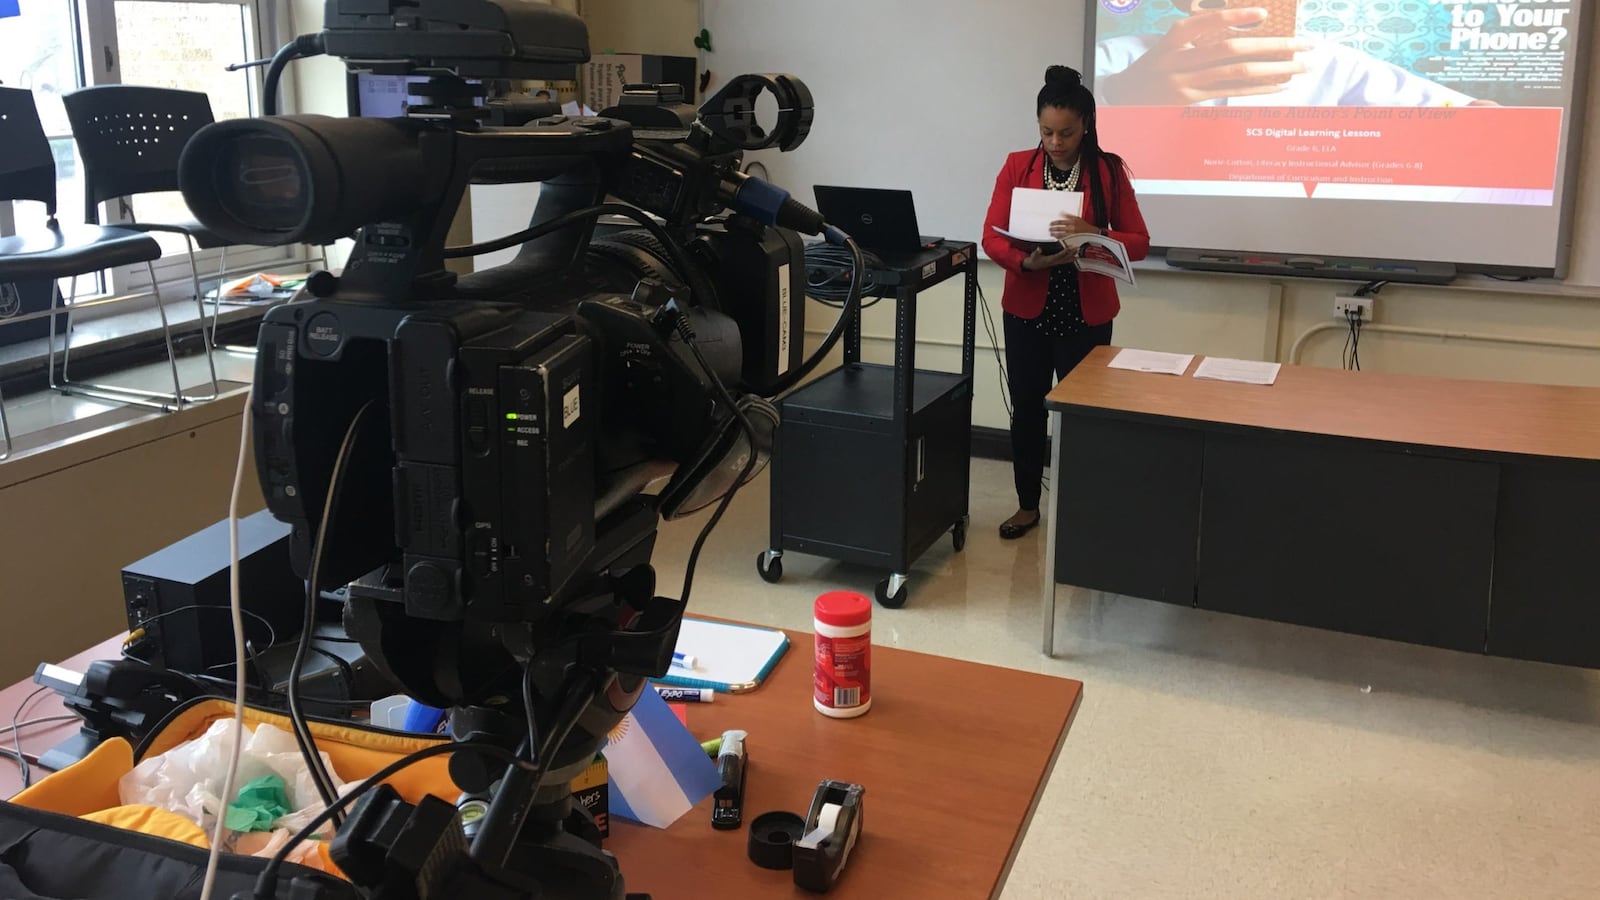 Shelby County Schools educators recorded lessons for TV to reach more students who may not have internet access.